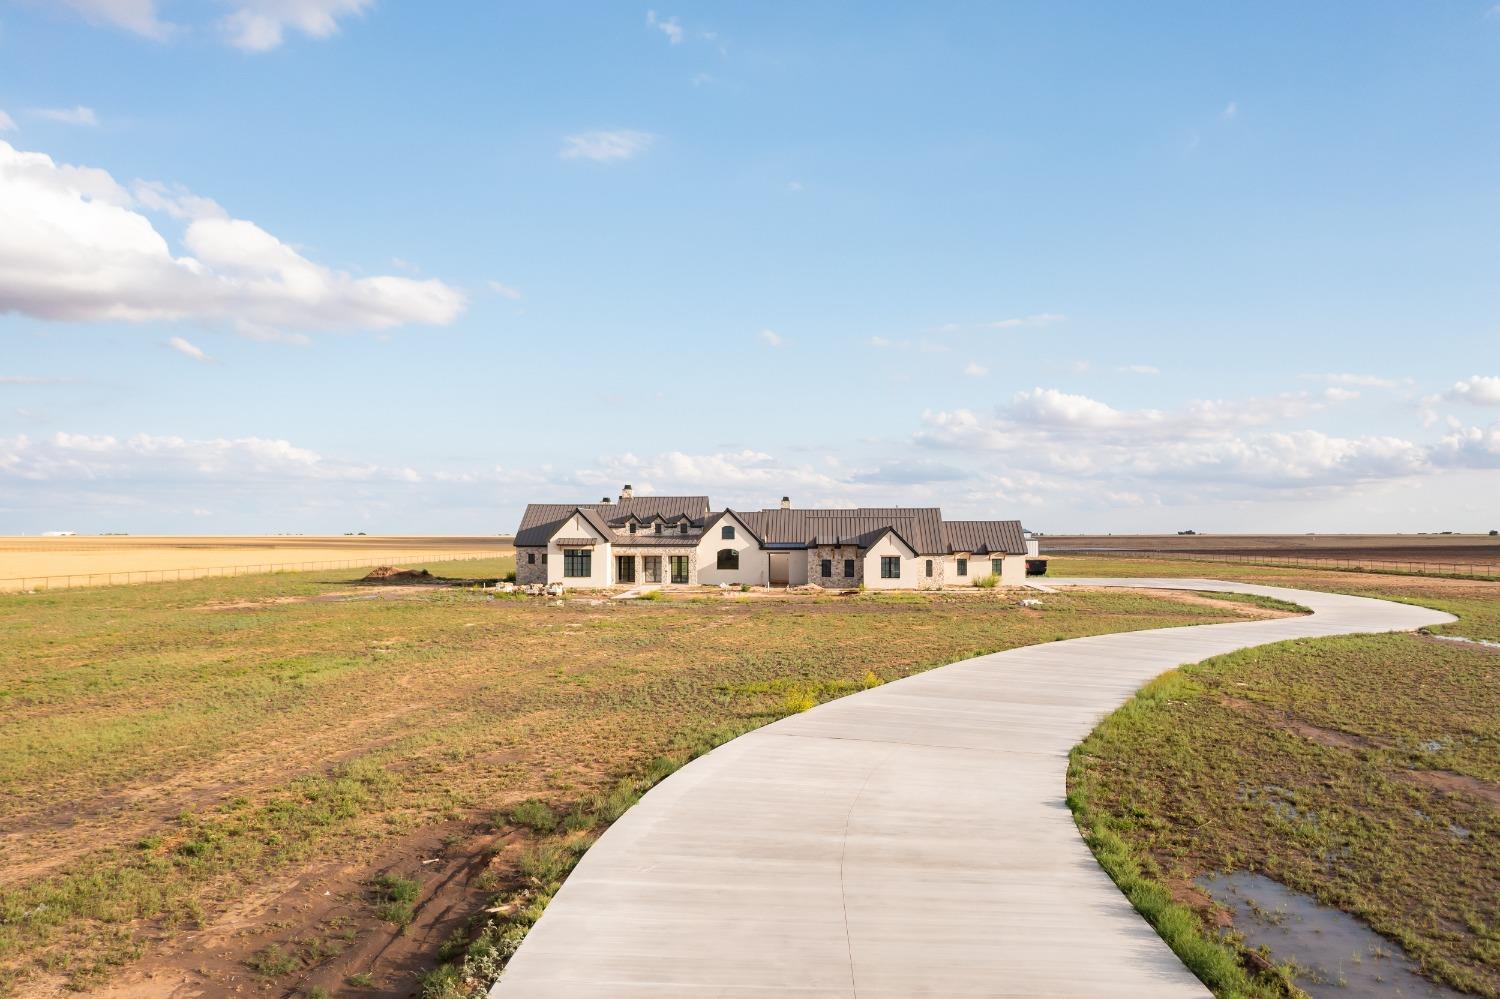 This stunning home built by Apex Homes is modern luxury living situated on 15 acres with a 15,000 SF barn, pipe fencing and a backdrop of grassland, offering the ultimate oasis. You'll find a magazine worthy design perfectly planned by HHC Living. The New Traditional Style is meant to be colorful and cozy, classic and contemporary, timely and timeless. An open concept plan is the heart of this home with a gourmet kitchen featuring high end appliances, ample space to entertain while the main living area is spacious and features large windows that provide picturesque views of the surrounding landscape. A Game Room inspired by the Drover Hotel is perfect for hosting. The Primary suite boasts a marble fireplace, separate closets and private water closets. The home provides a study and 3 additional generously sized bedrooms, each with an en-suite bath. With high end finishes including custom mill work, marble countertops, wood floors, and marble tile, you'll want to see this today!